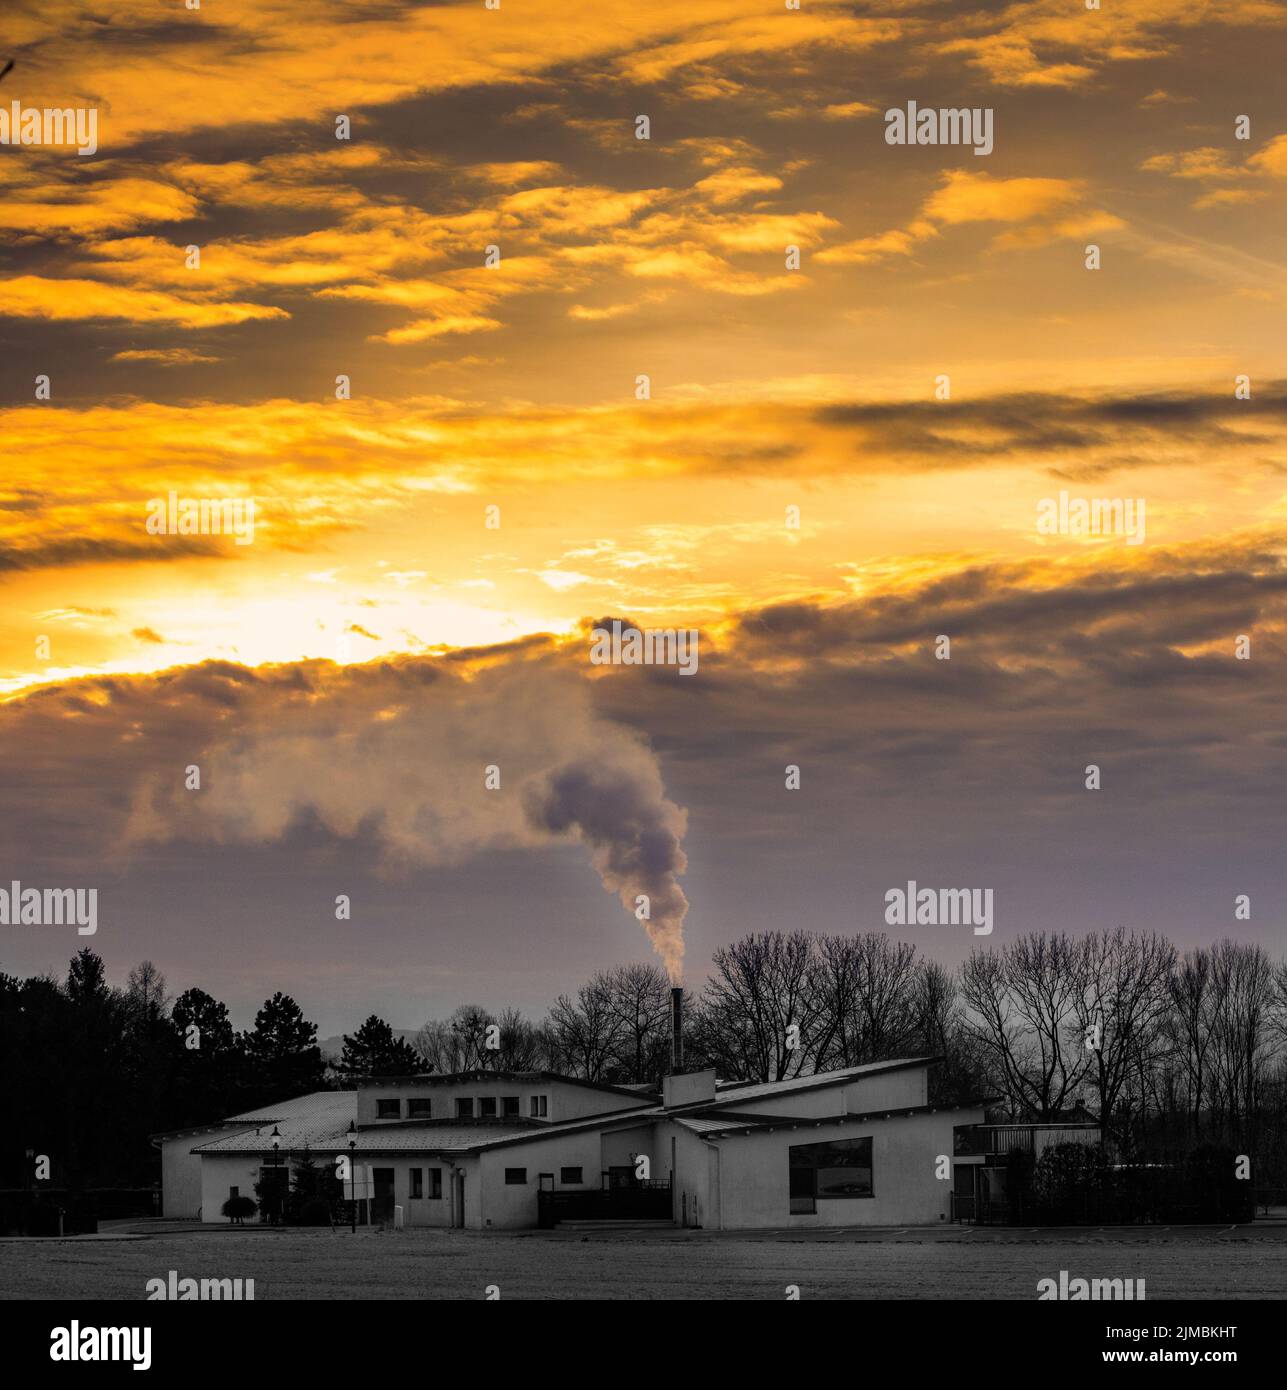 Fantastic landscape glowing by sunlight. Dramatic wintry scene with a house during the sunrise Stock Photo